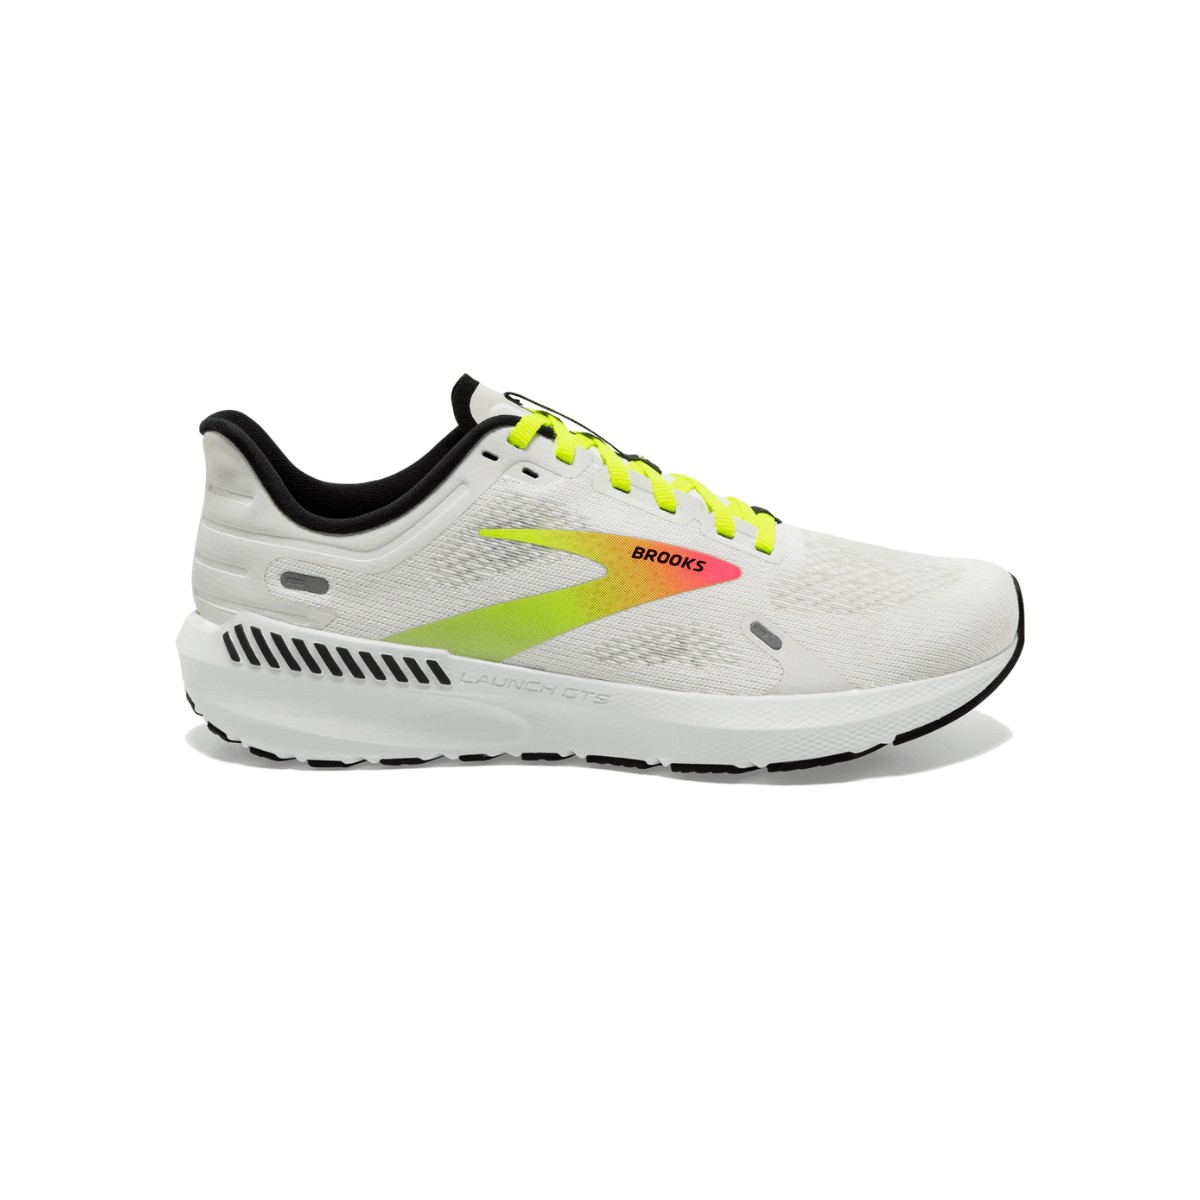 Brooks Launch GTS 9 White Pink AW22 Women's Shoes AW22, Size 37,5 - EUR